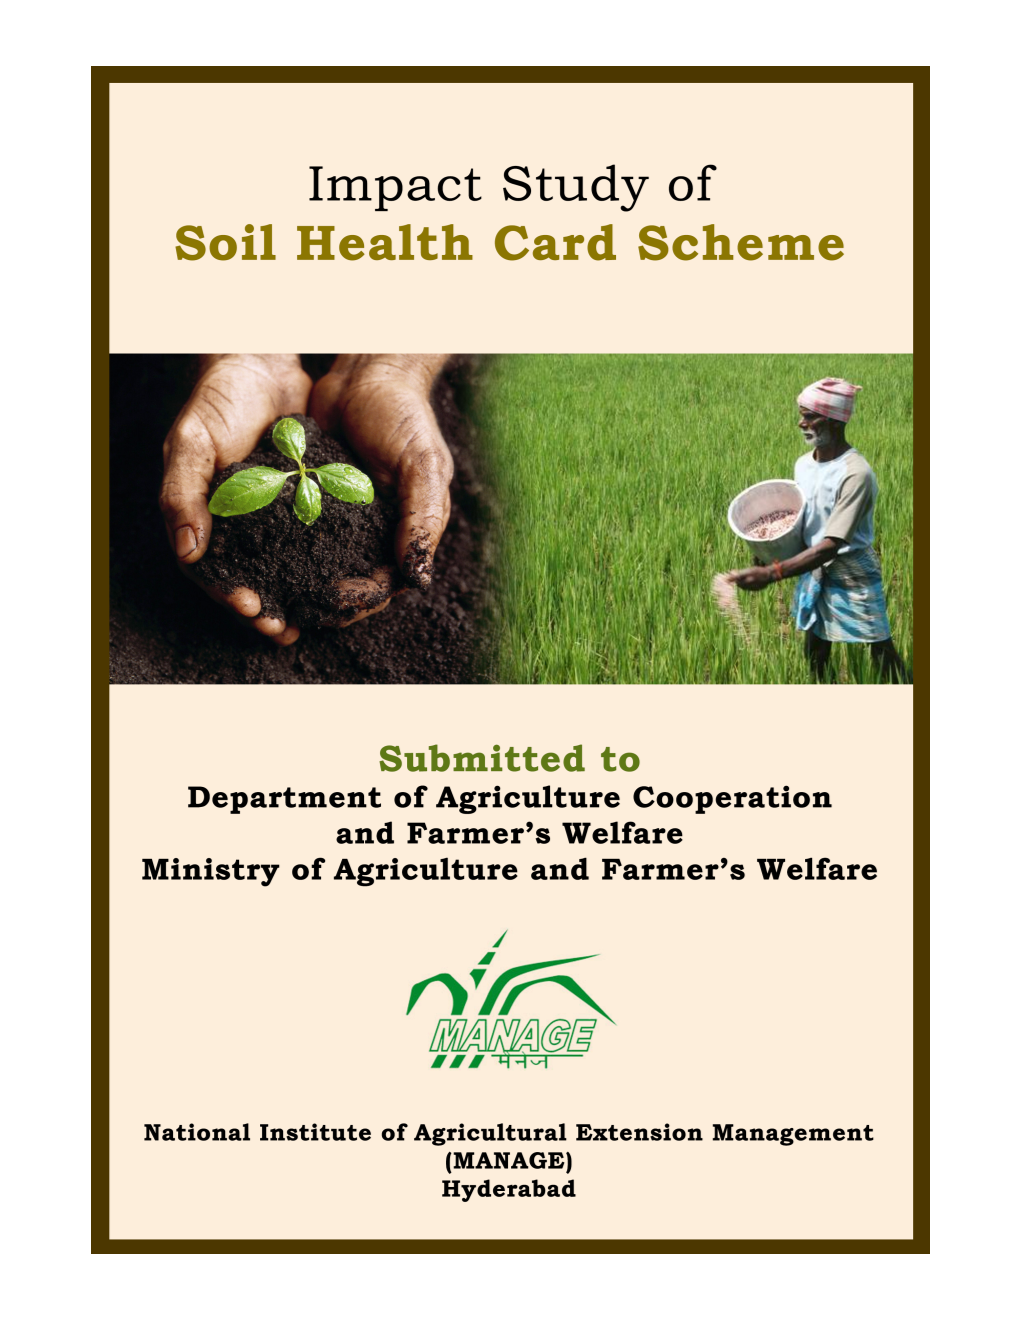 Impact Study of Soil Health Card Scheme, National Institute of Agricultural Extension Management (MANAGE), Hyderabad-500030, Pp.210